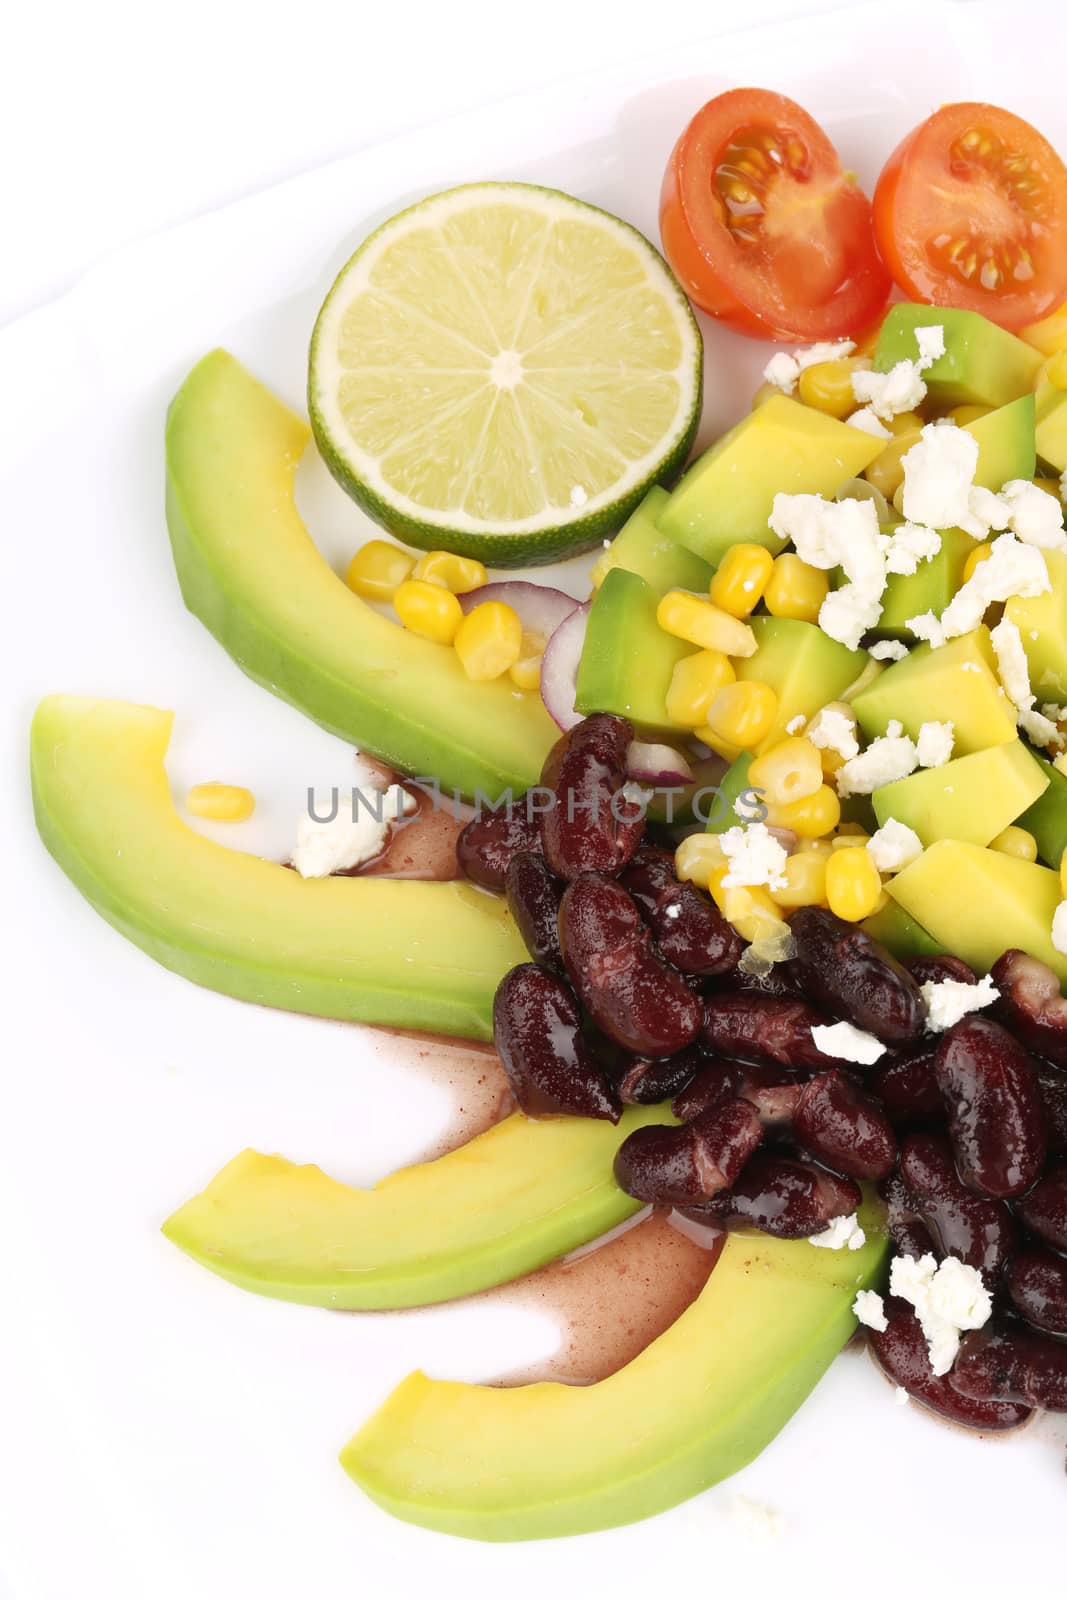 Red beans salad with avocado. Isolated on a white background.